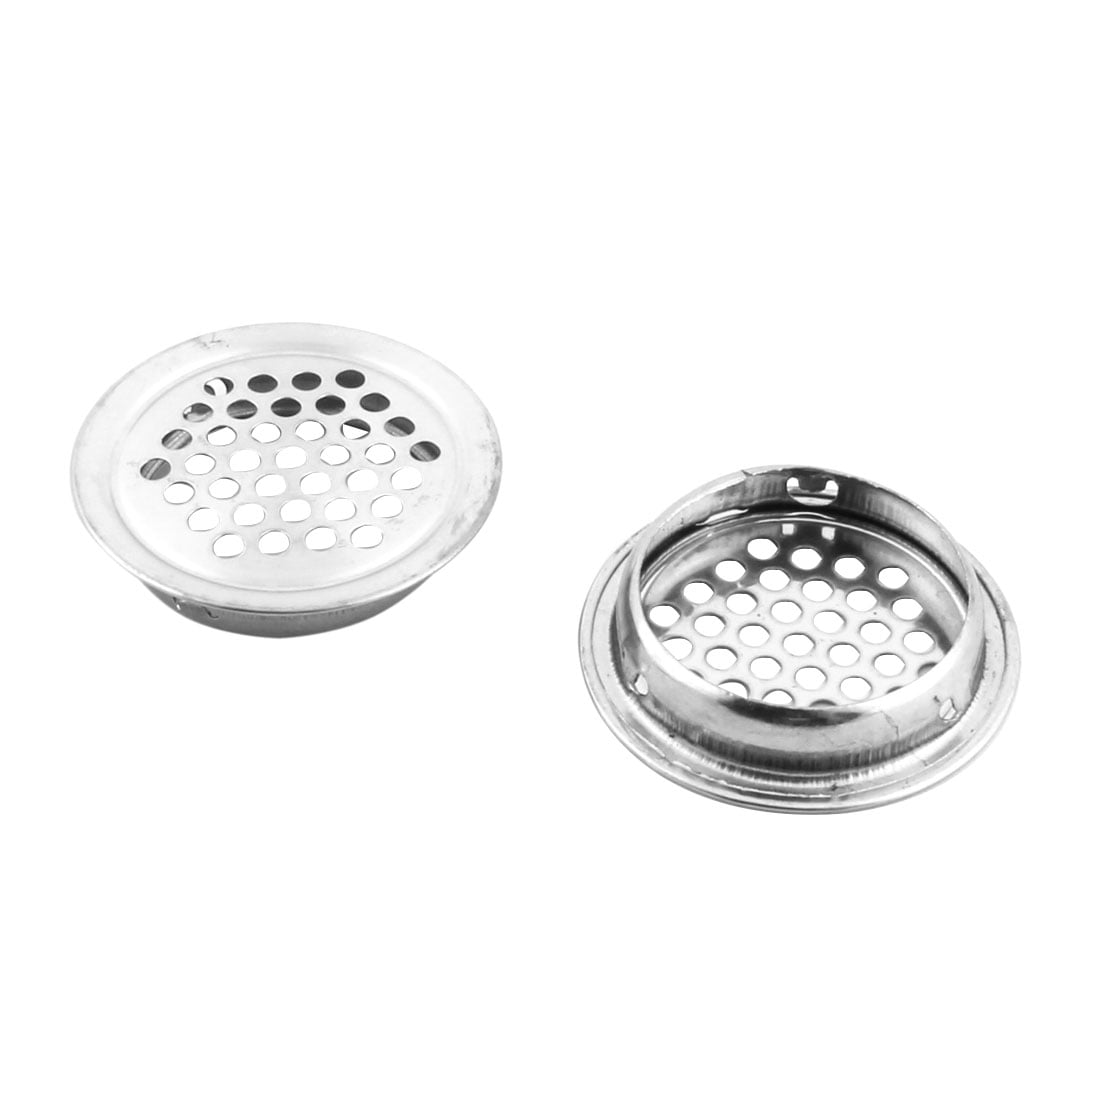 Household Metal Kitchenware Sift Drain Food Filter Strainer Silver Tone ...